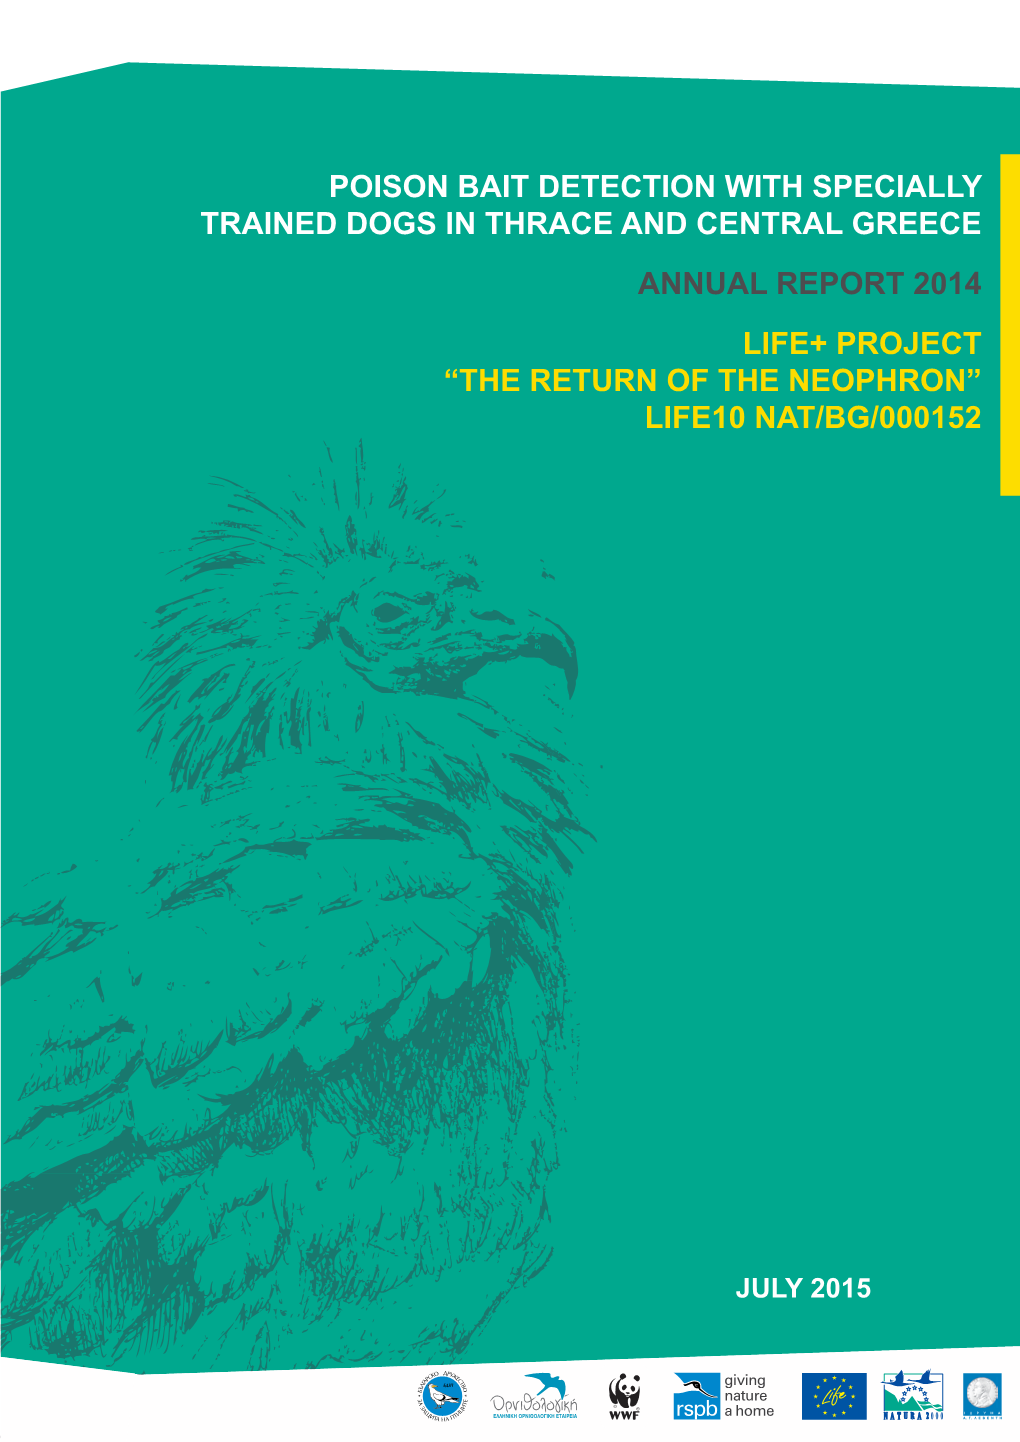 Poison Bait Detection with Specially Trained Dogs in Thrace and Central Greece Annual Report 2014 LIFE+ Project “The Return of the Neophron” LIFE10 NAT/BG/000152